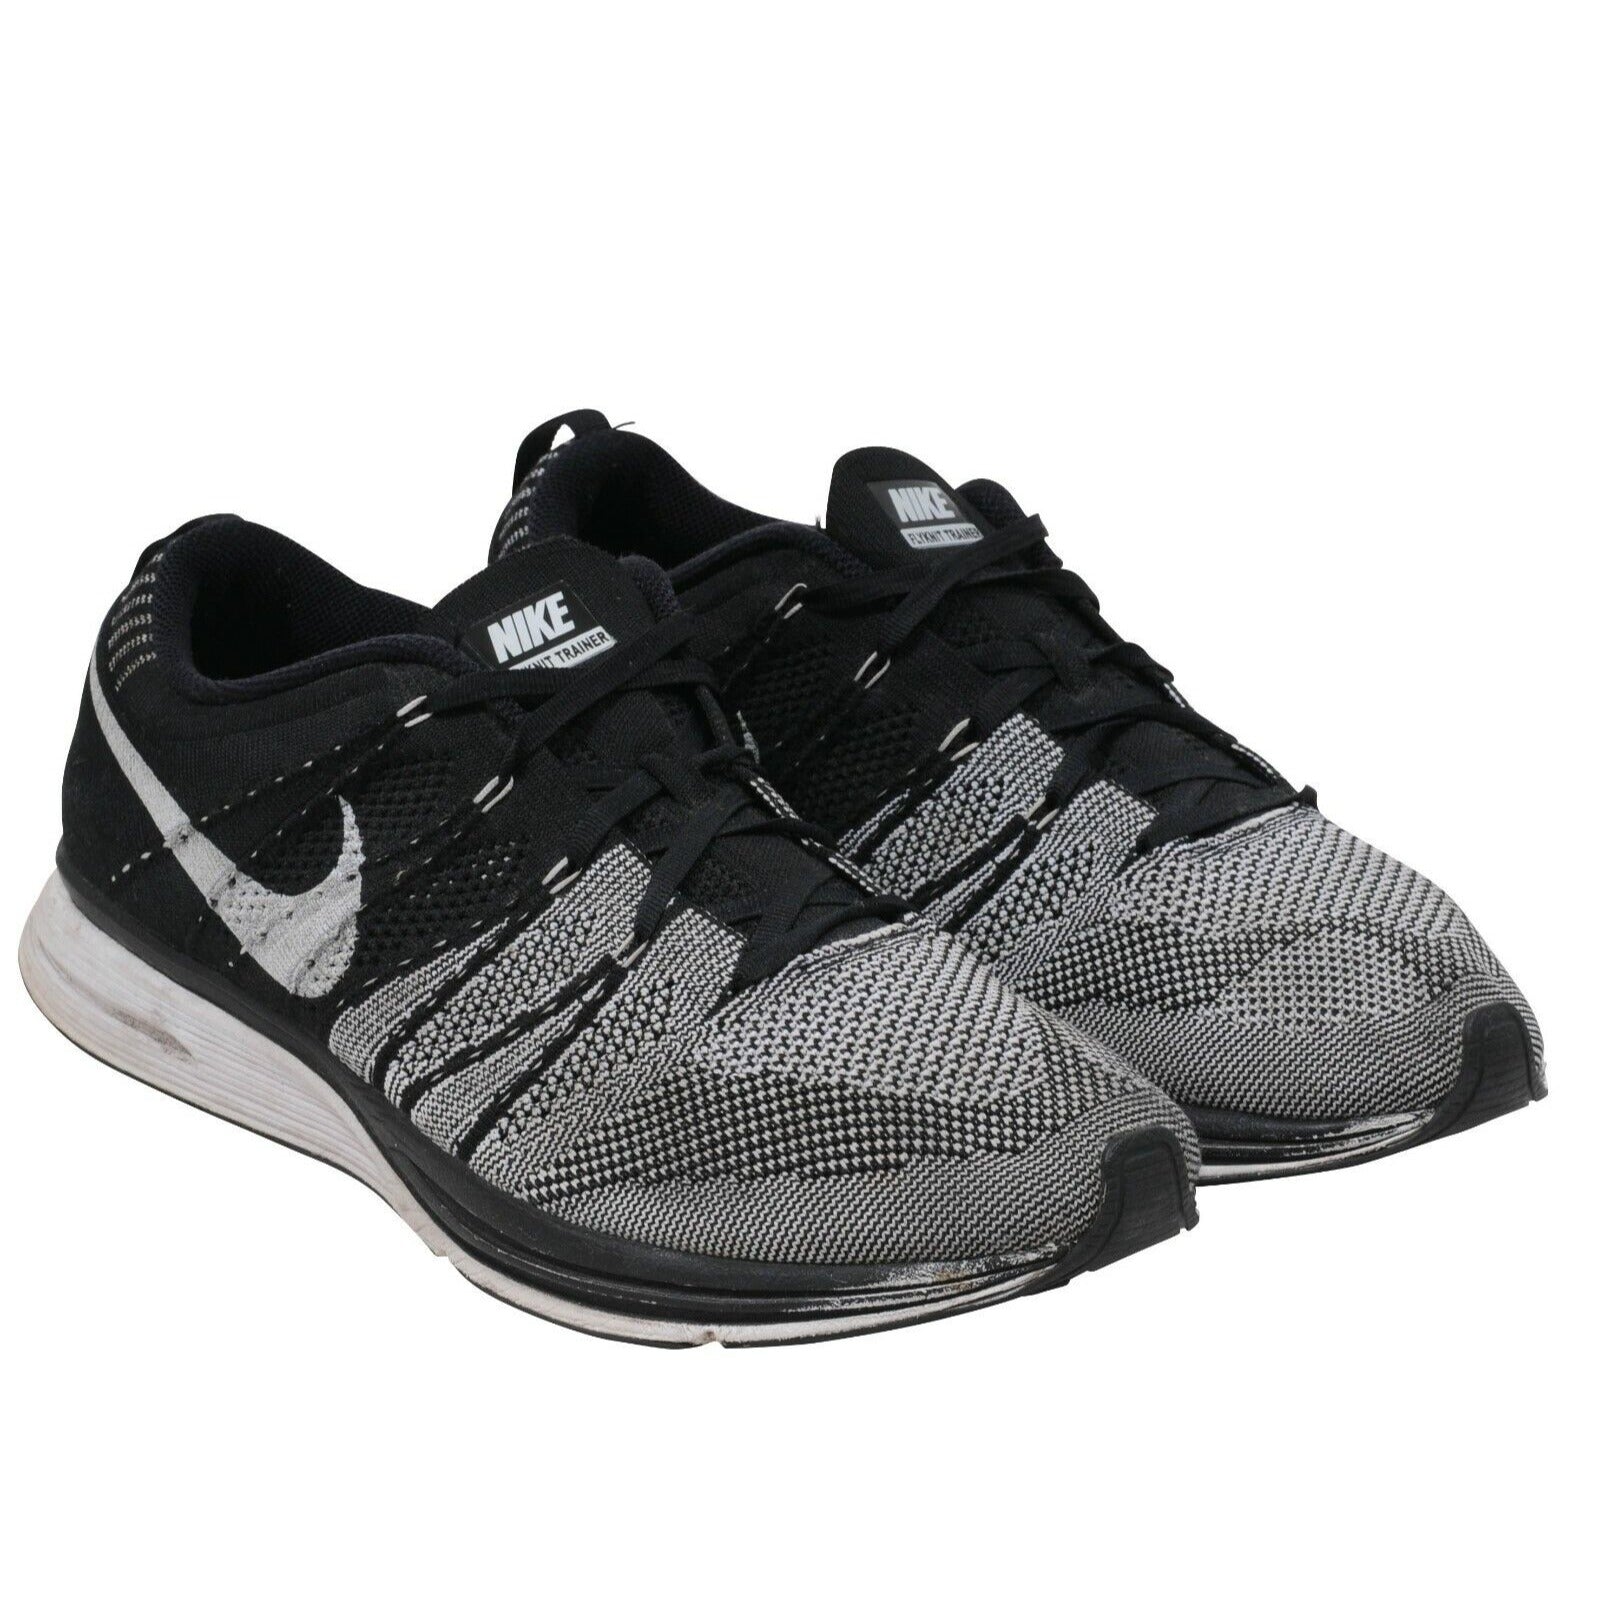 cometer Confirmación Conciso Nike Flyknit Trainer Black White 2012 Running Training Sneakers 11 –  THE-ECHELON